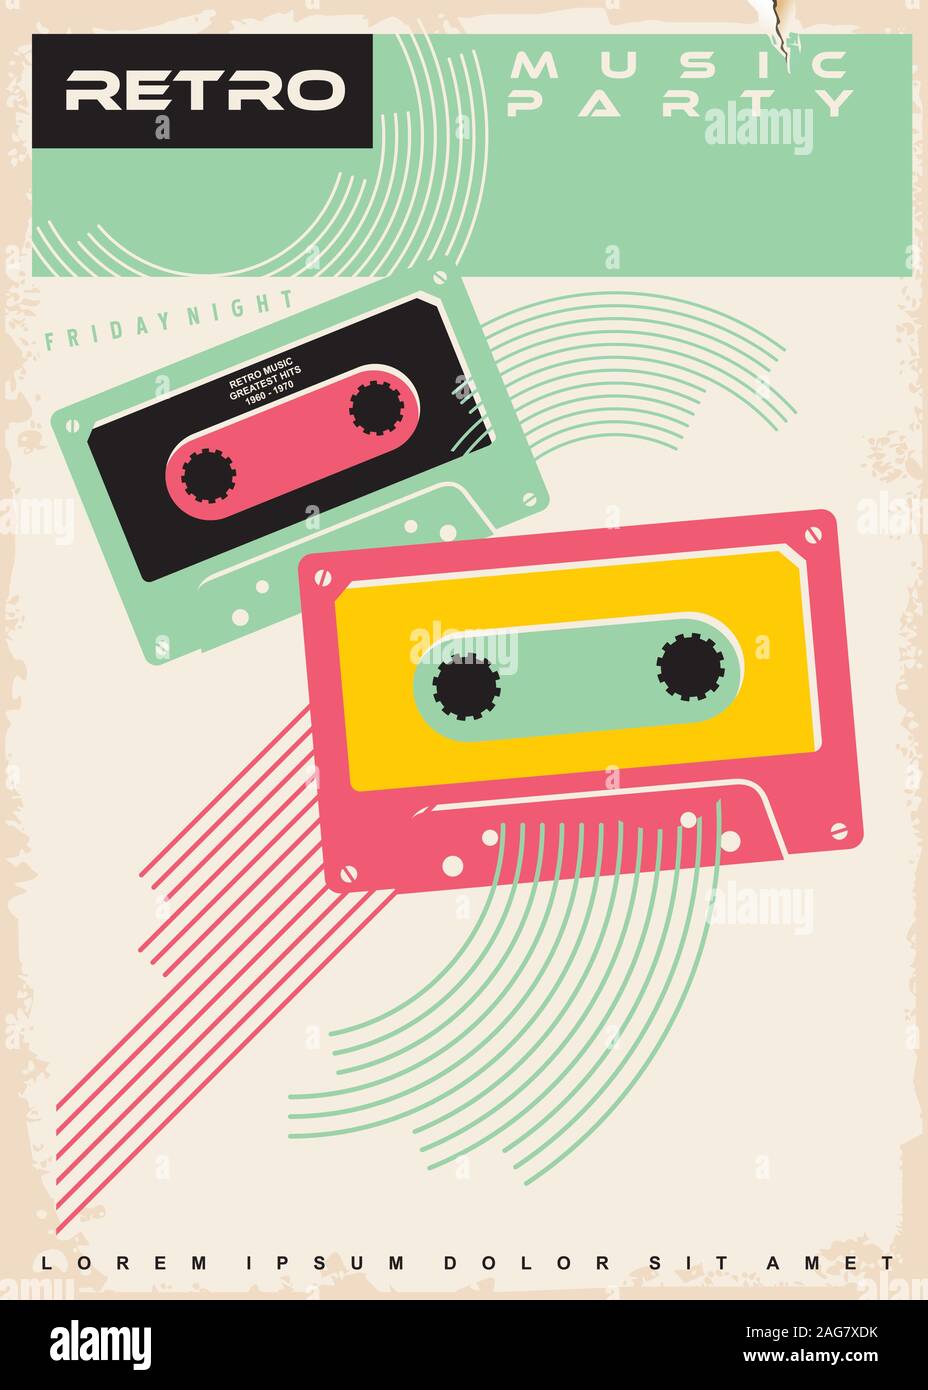 Retro music party poster. Anti gravity colorful cassette tapes on vintage background. Vector ad illustration. Stock Vector